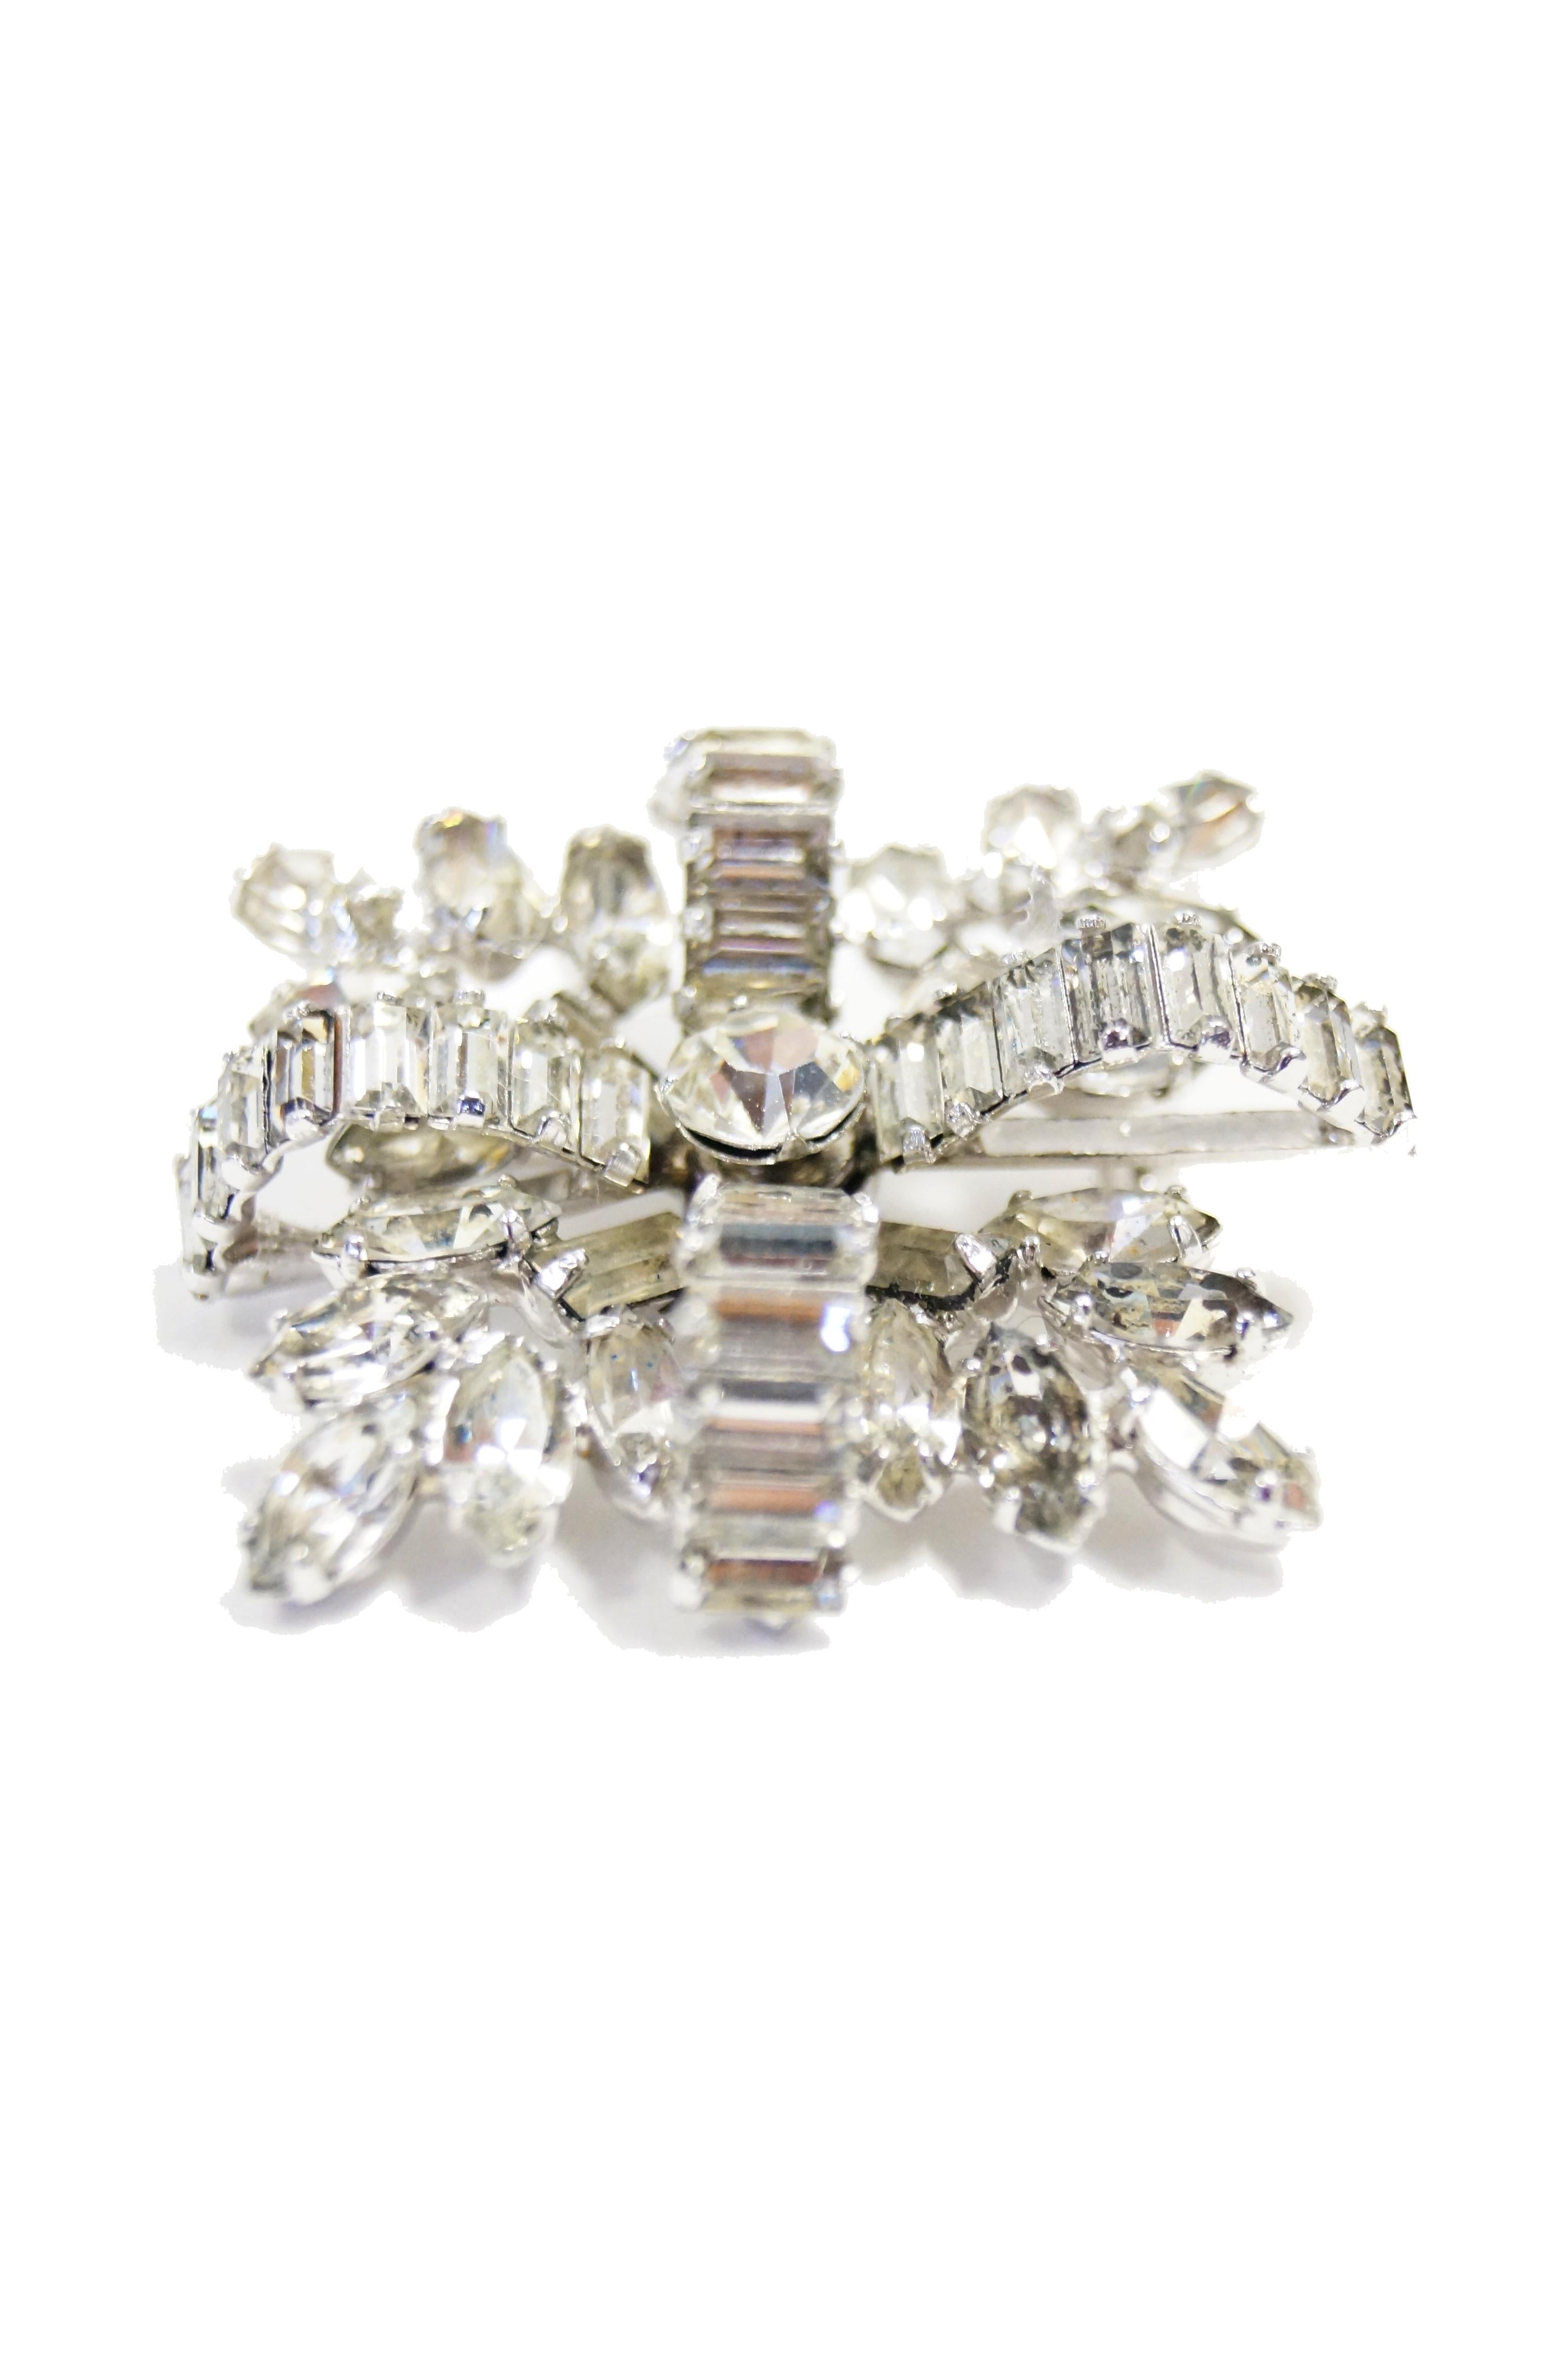 Gorgeous clear and bright rhinestone brooch by Hattie Carnegie. This brooch has a round, multifaceted center with four, curved, cross - like bars composed of emerald - cut rhinestones. The bottom layer of the brooch is composed of floral